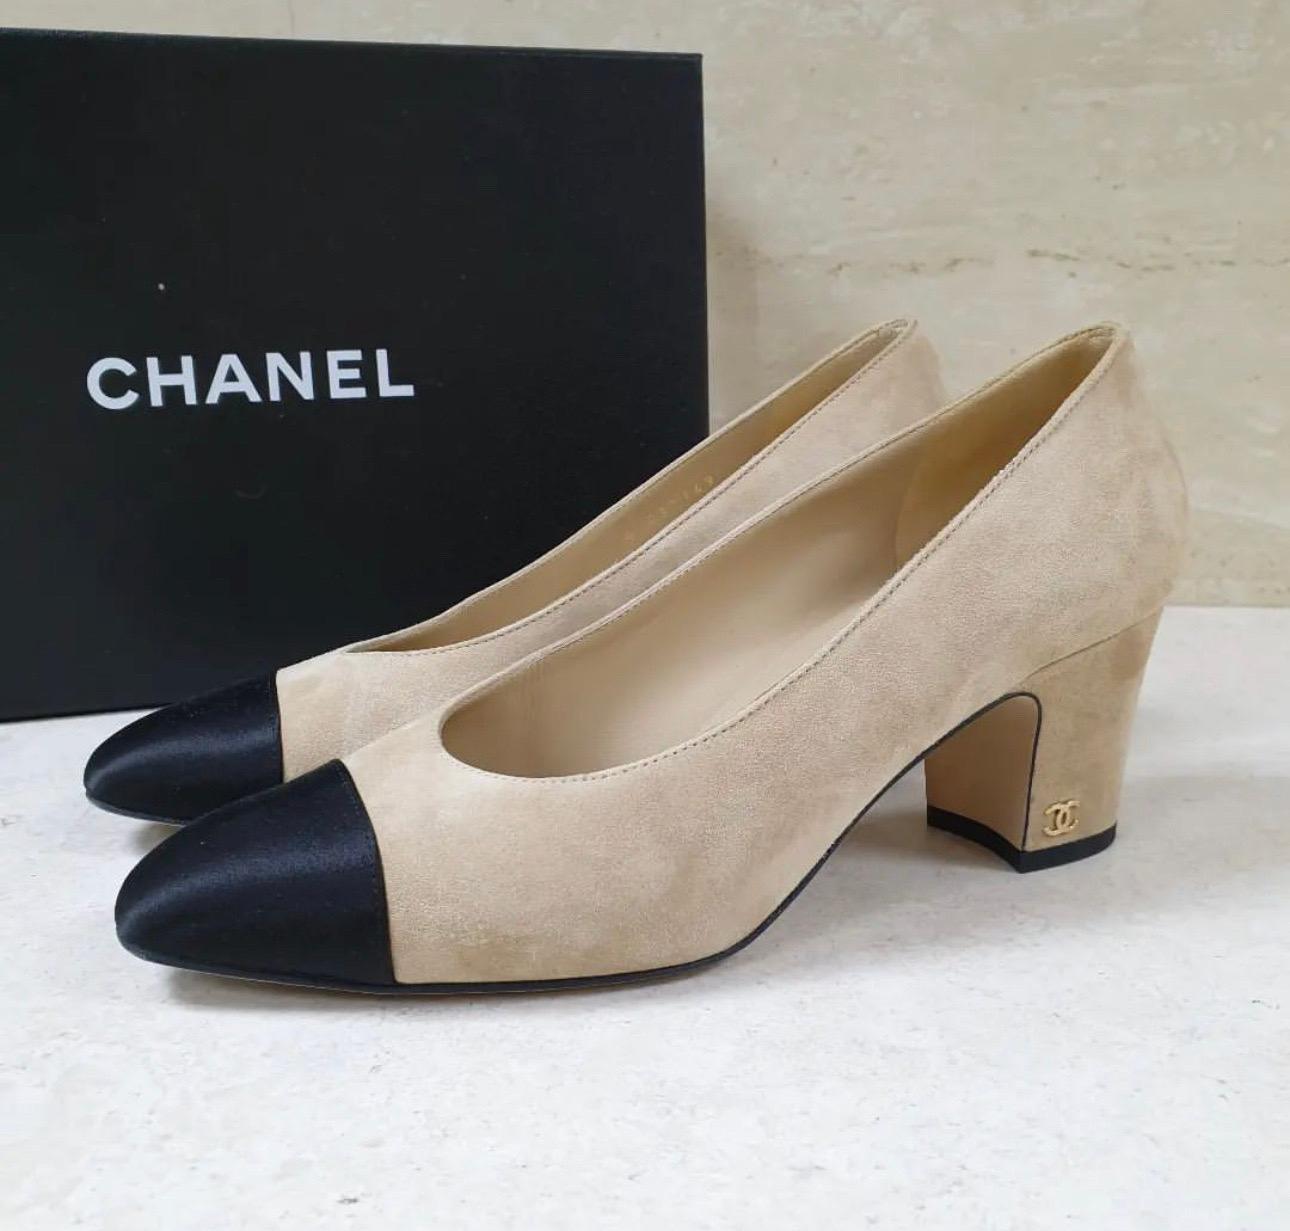 This is an authentic pair of CHANEL Suede Satin Cap Toe Low Heel Pumps in Beige and Black. 
These are a charming pair of heels that are crafted of suede in beige. 
The shoe features a black satin cap toe and a covered heel accented with a small